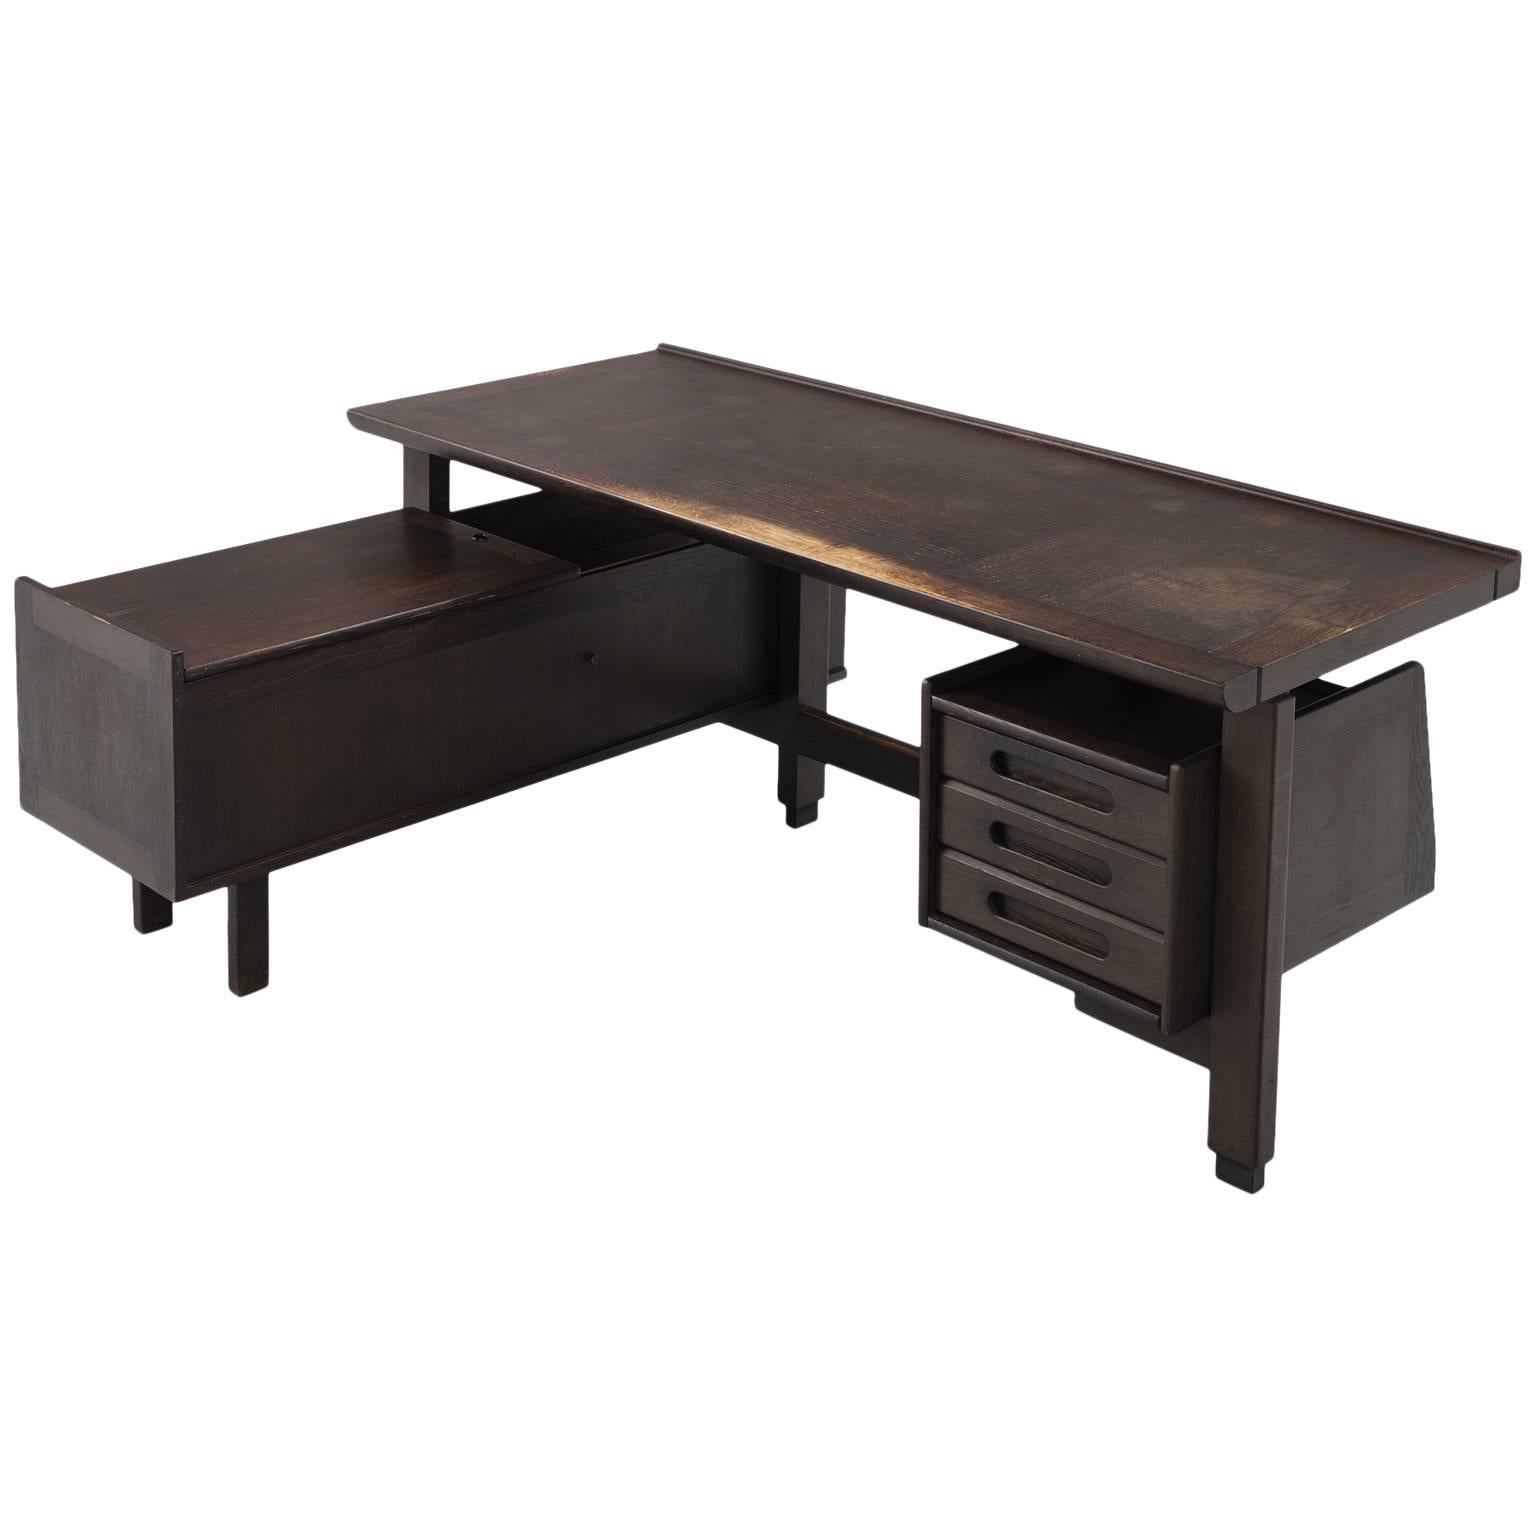 Guillerme and Chambron Executive Desk in Dark Stained Oak